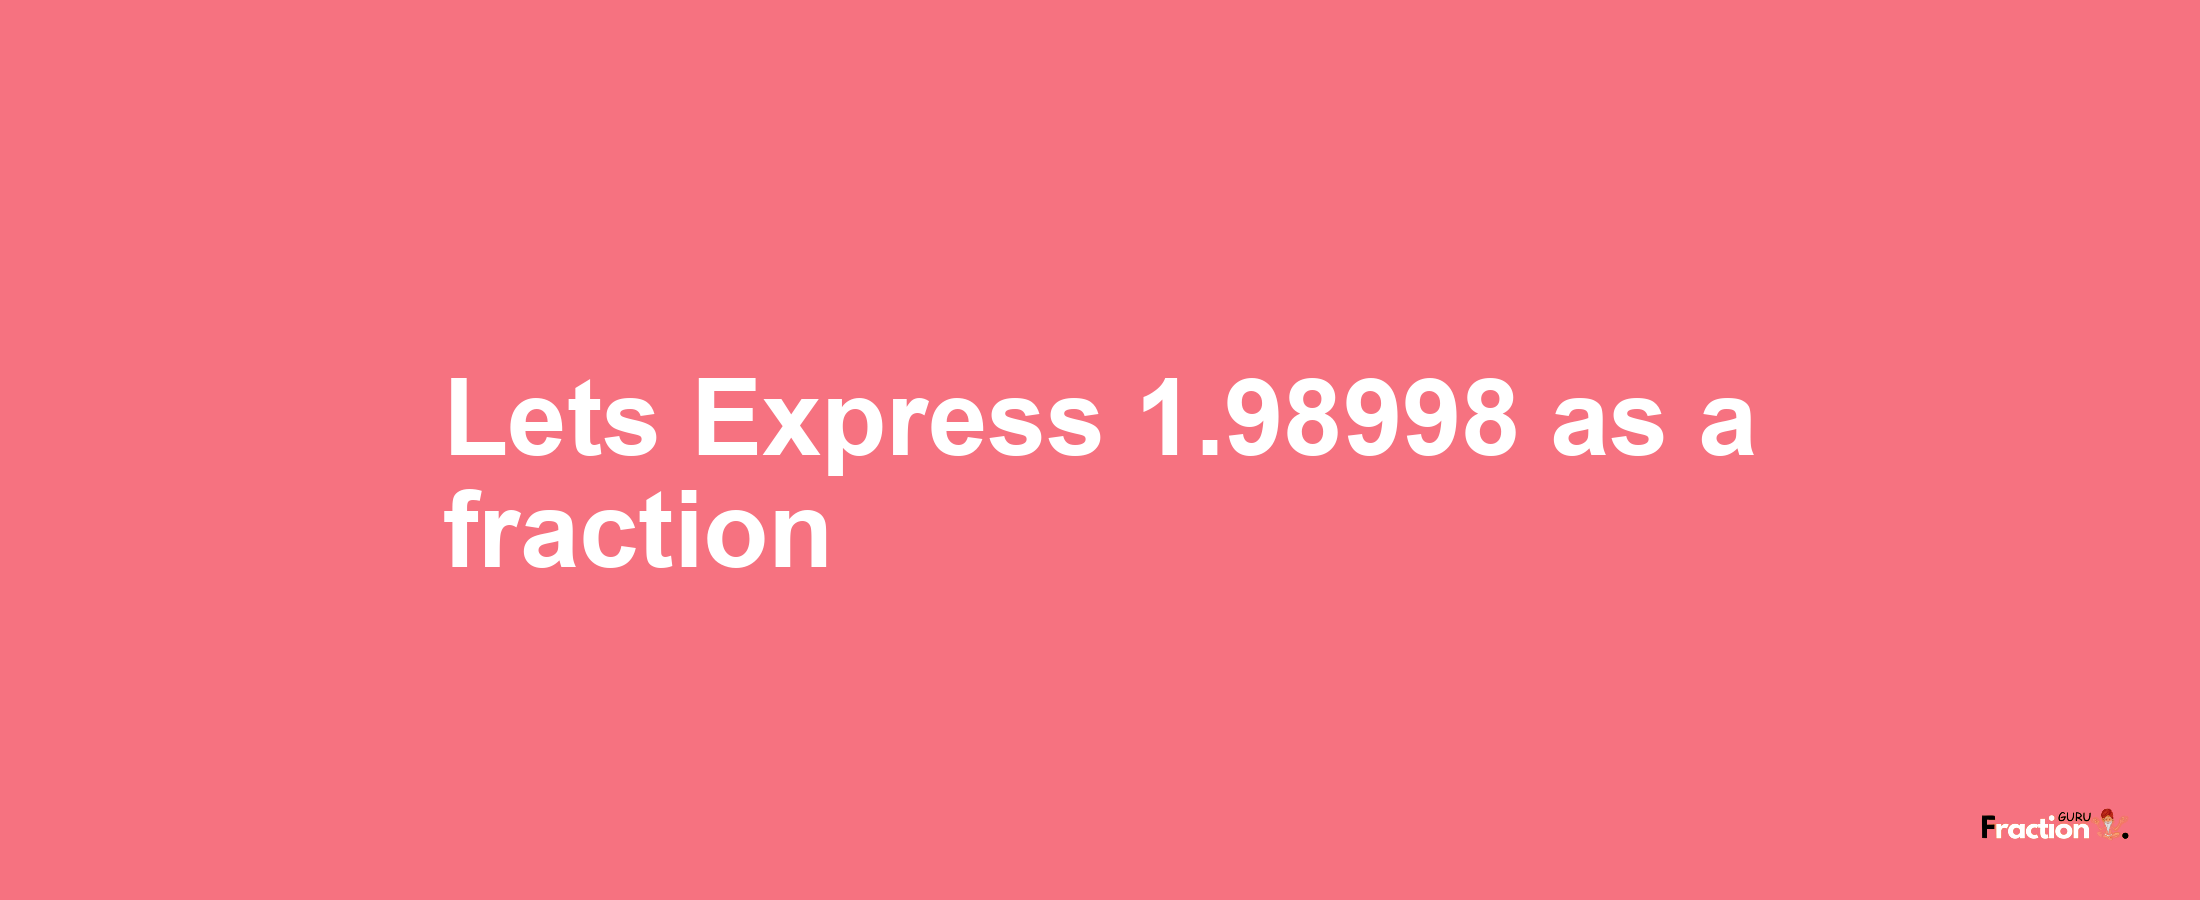 Lets Express 1.98998 as afraction